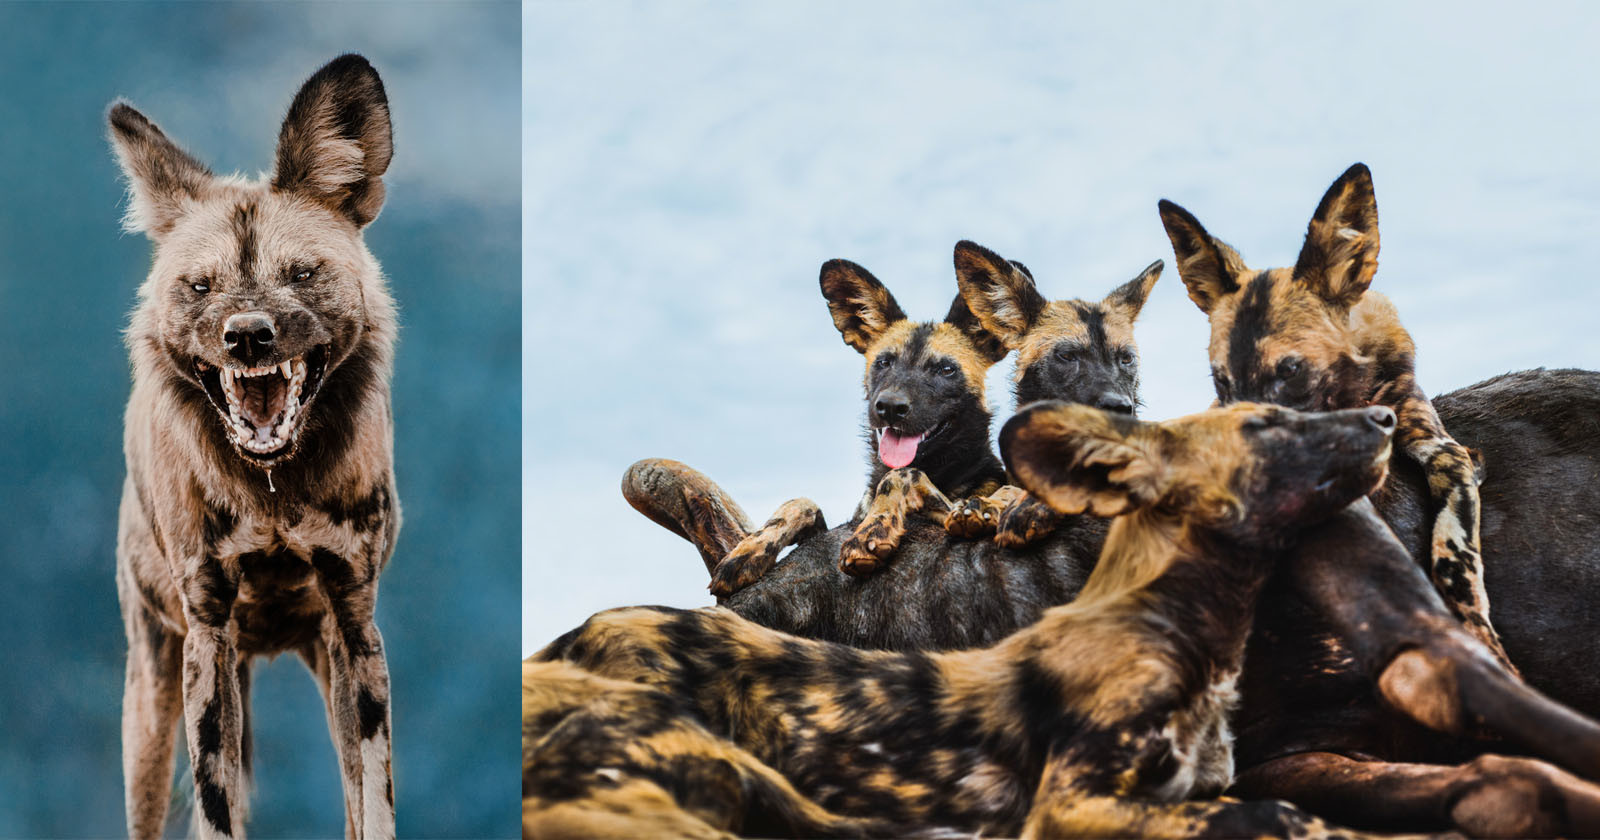 Photographing the Endangered African Wild Dog in Namibia